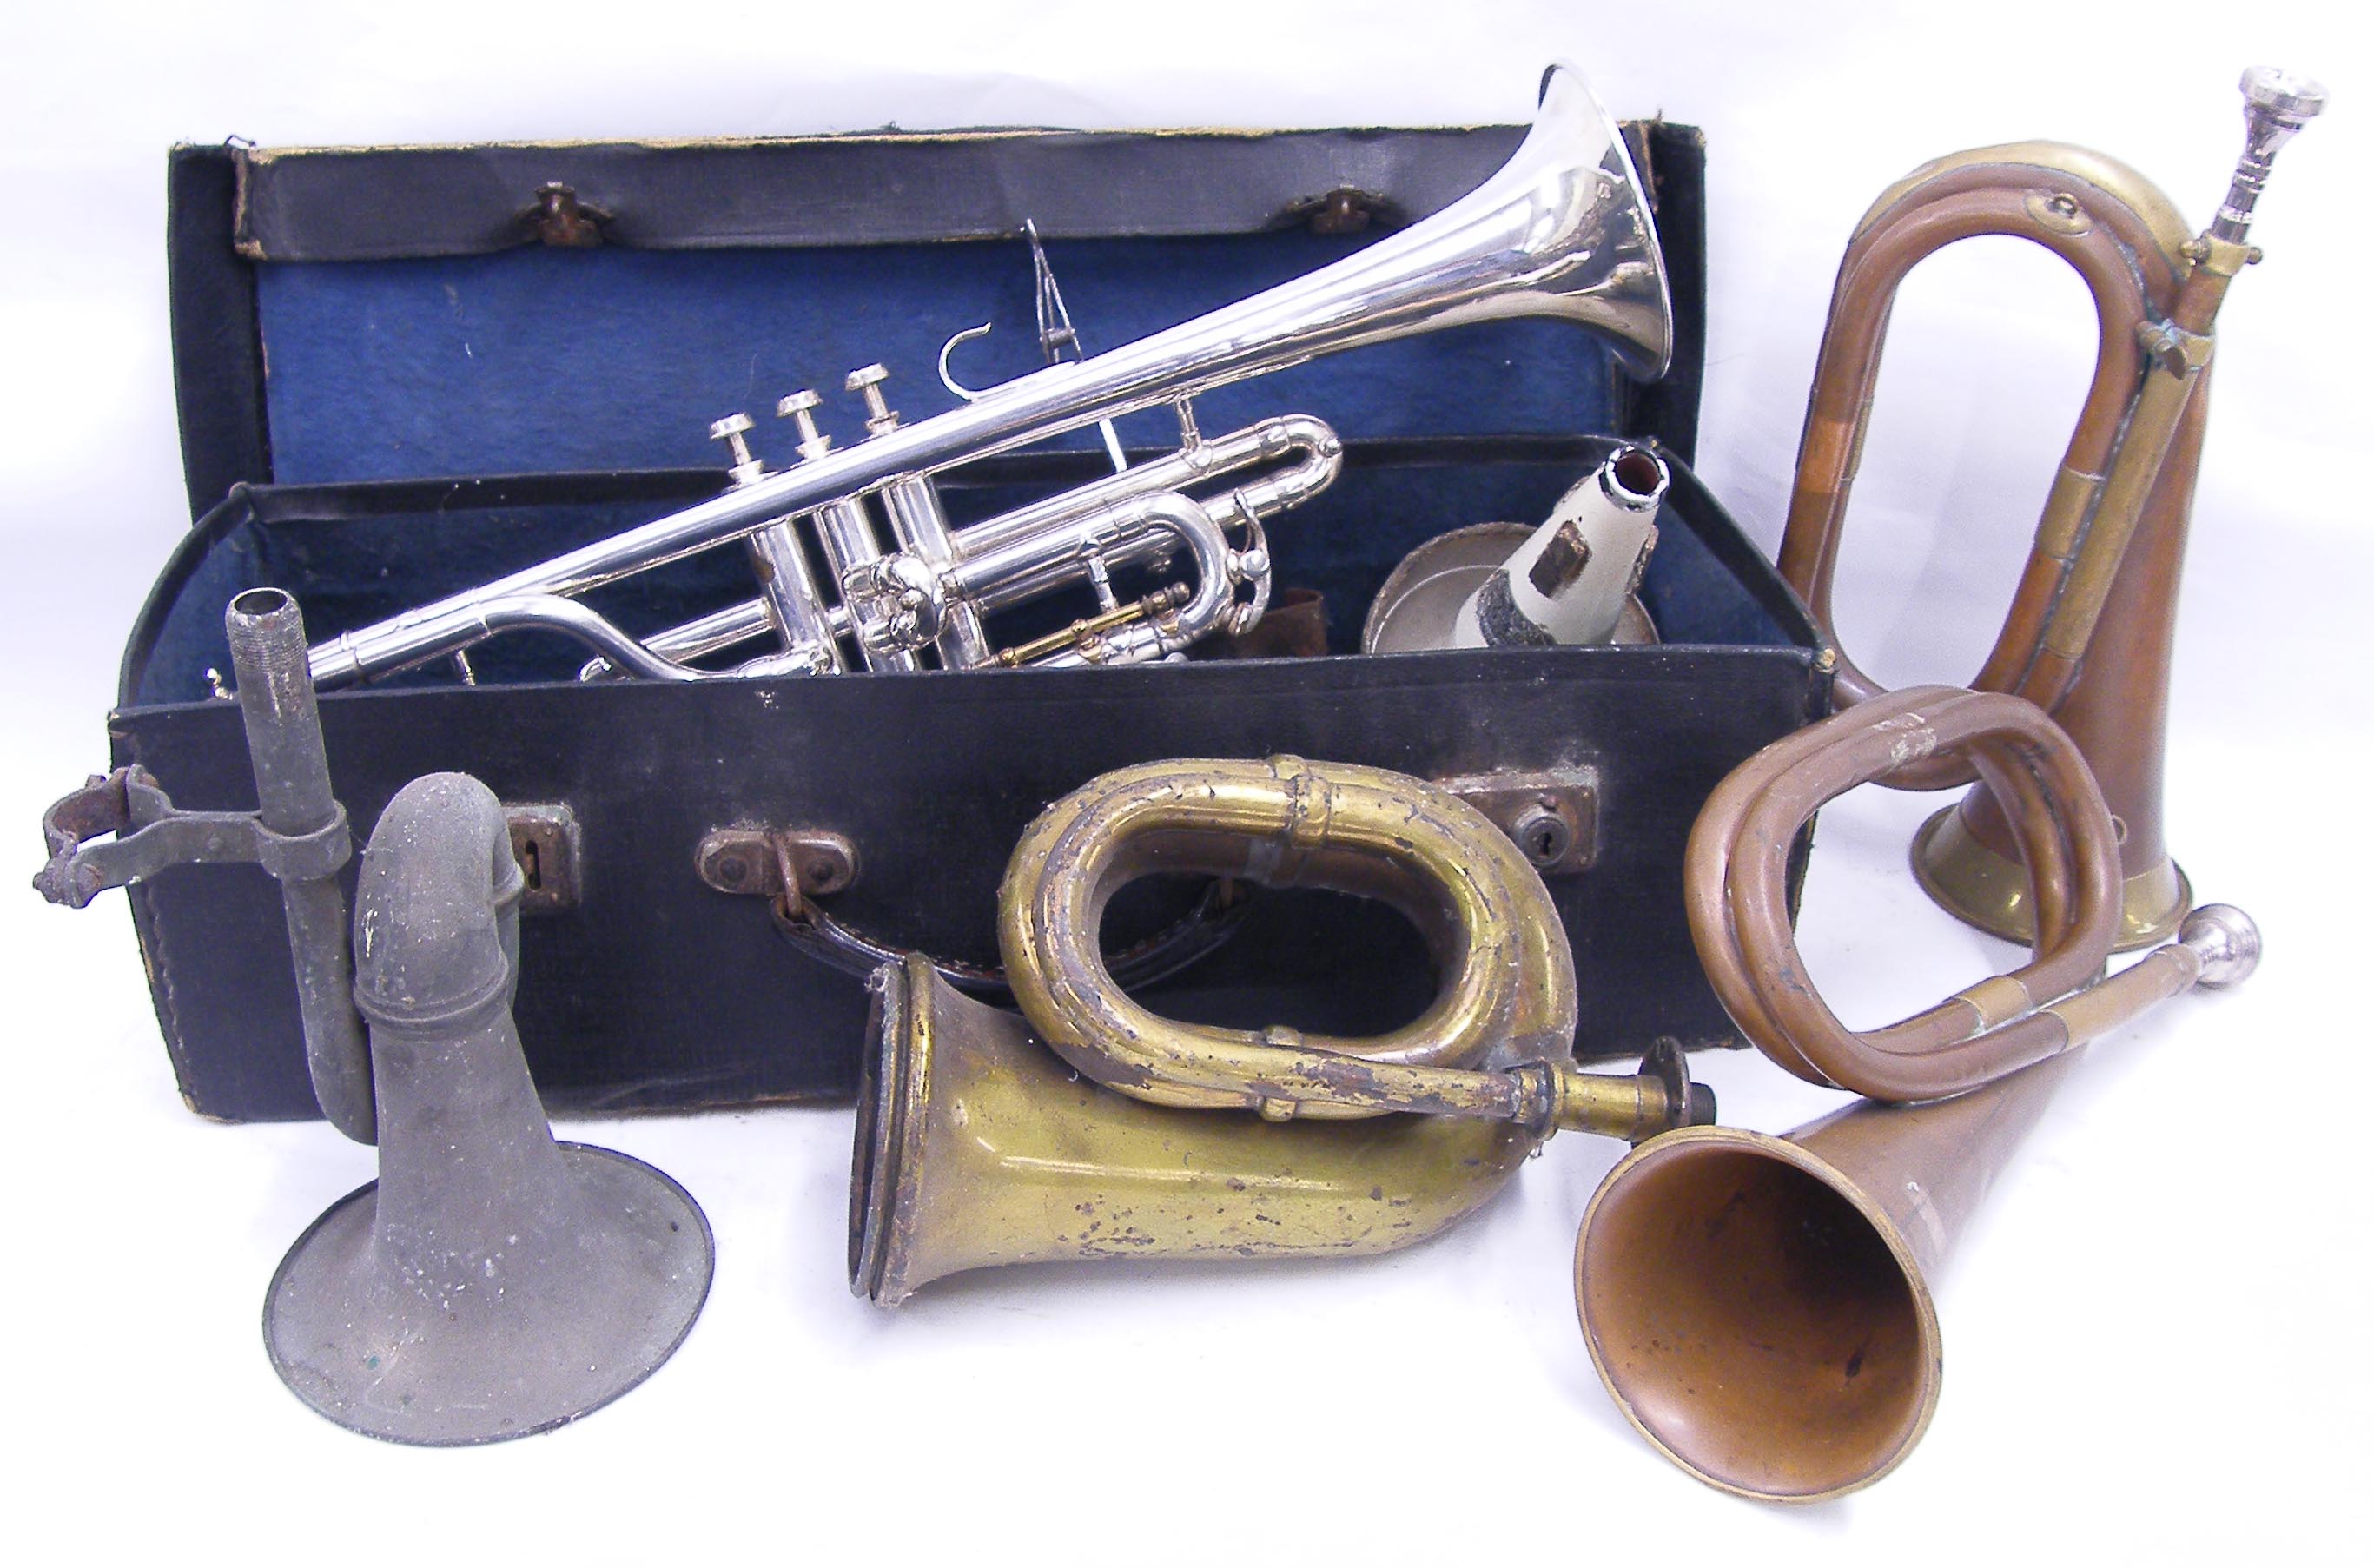 C. Mahillon & Co B flat silver plated trumpet, circa 1920, no. 349, with period mutes and Rudy